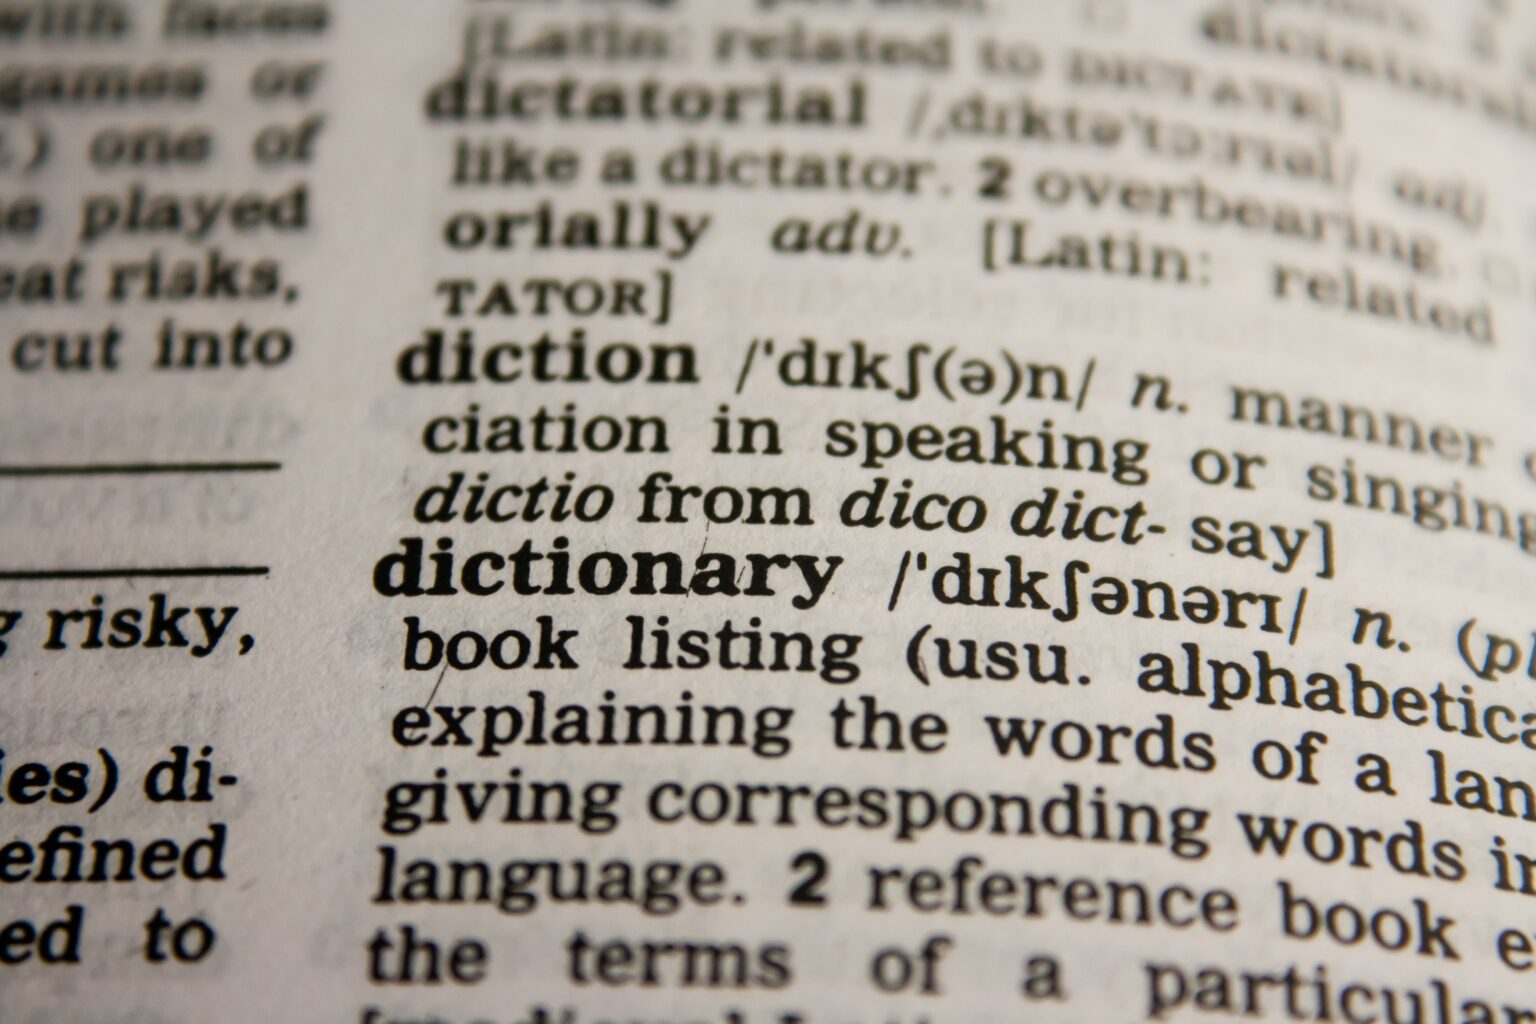 spanish to english dictionary online